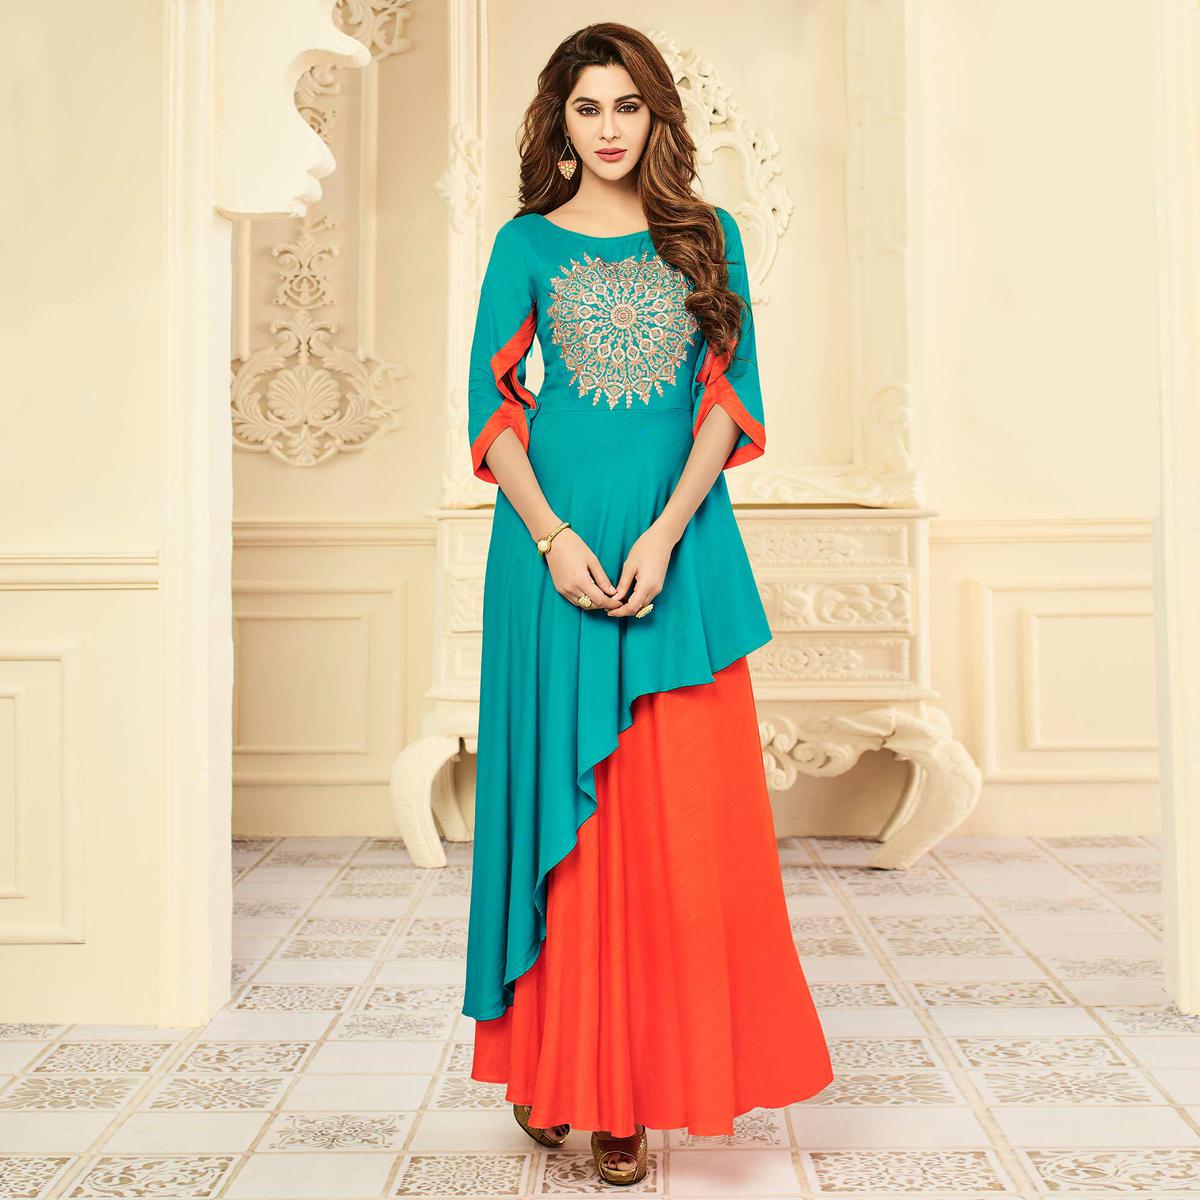 Entrancing Sky Blue-Orange Colored Party Wear Floral Embroidered Rayon Kurti